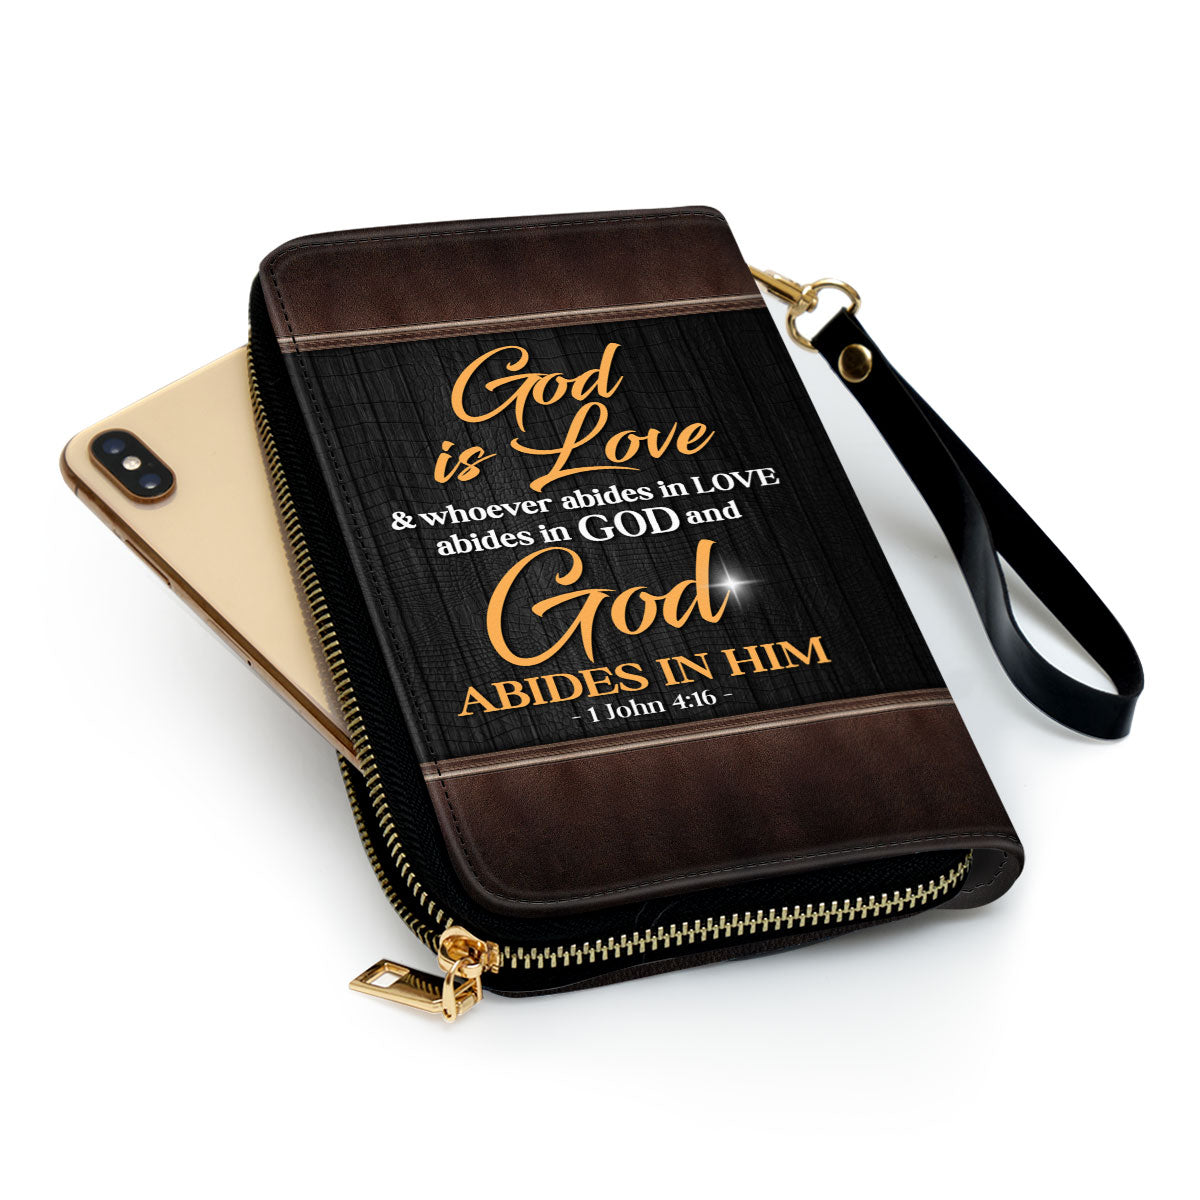 God Is Love 1 John 4 16 Clutch Purse For Women - Personalized Name - Christian Gifts For Women